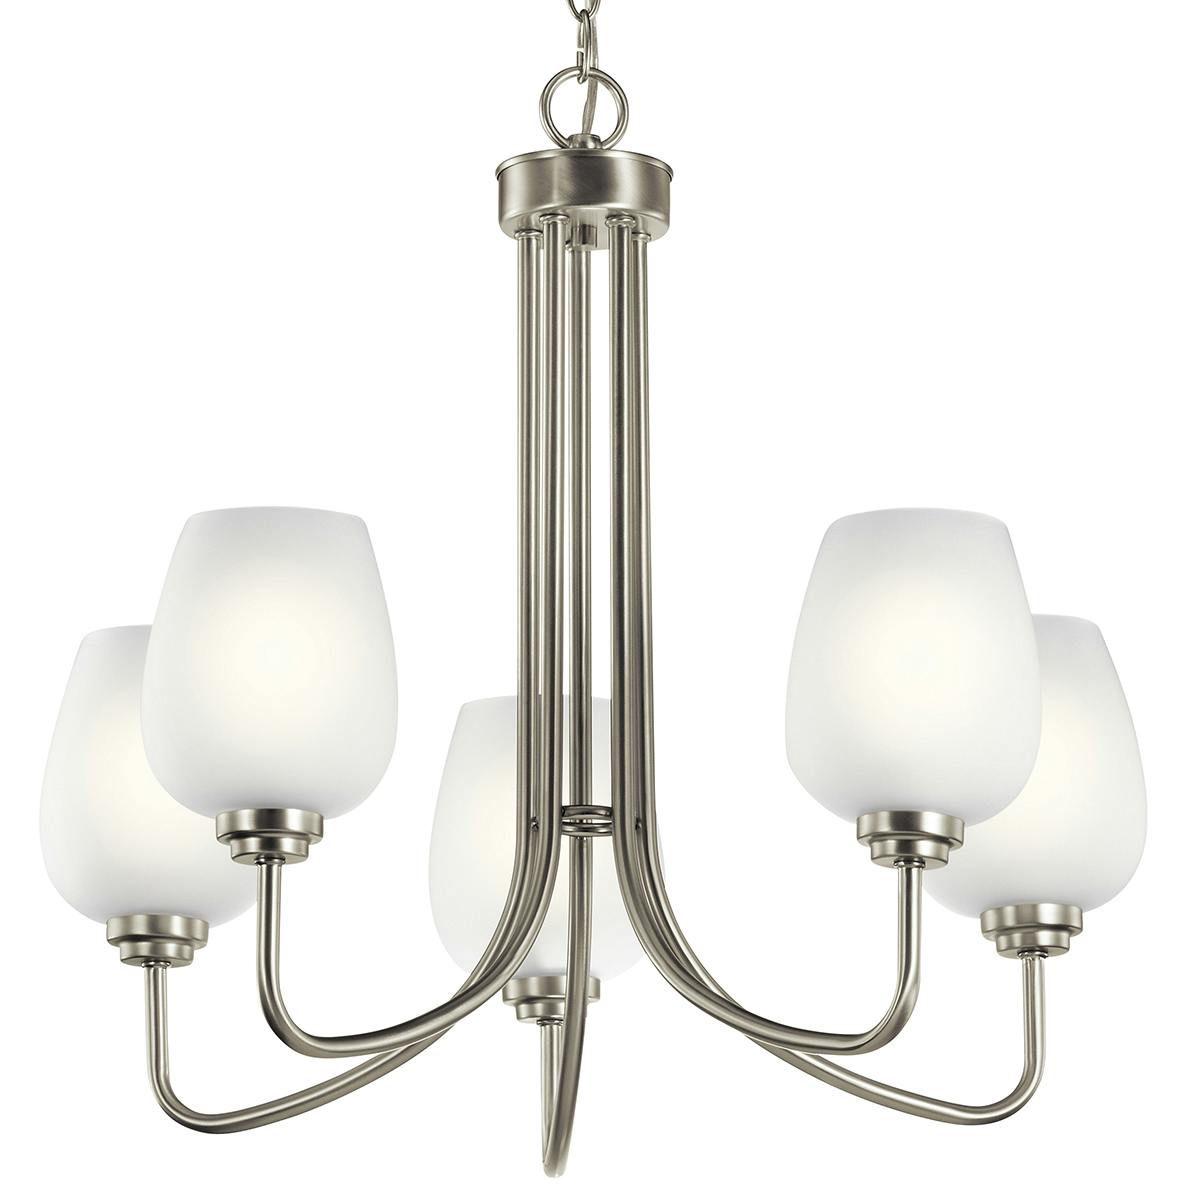 Close up view of the Valserrano 5 Light Nickel Chandelier on a white background